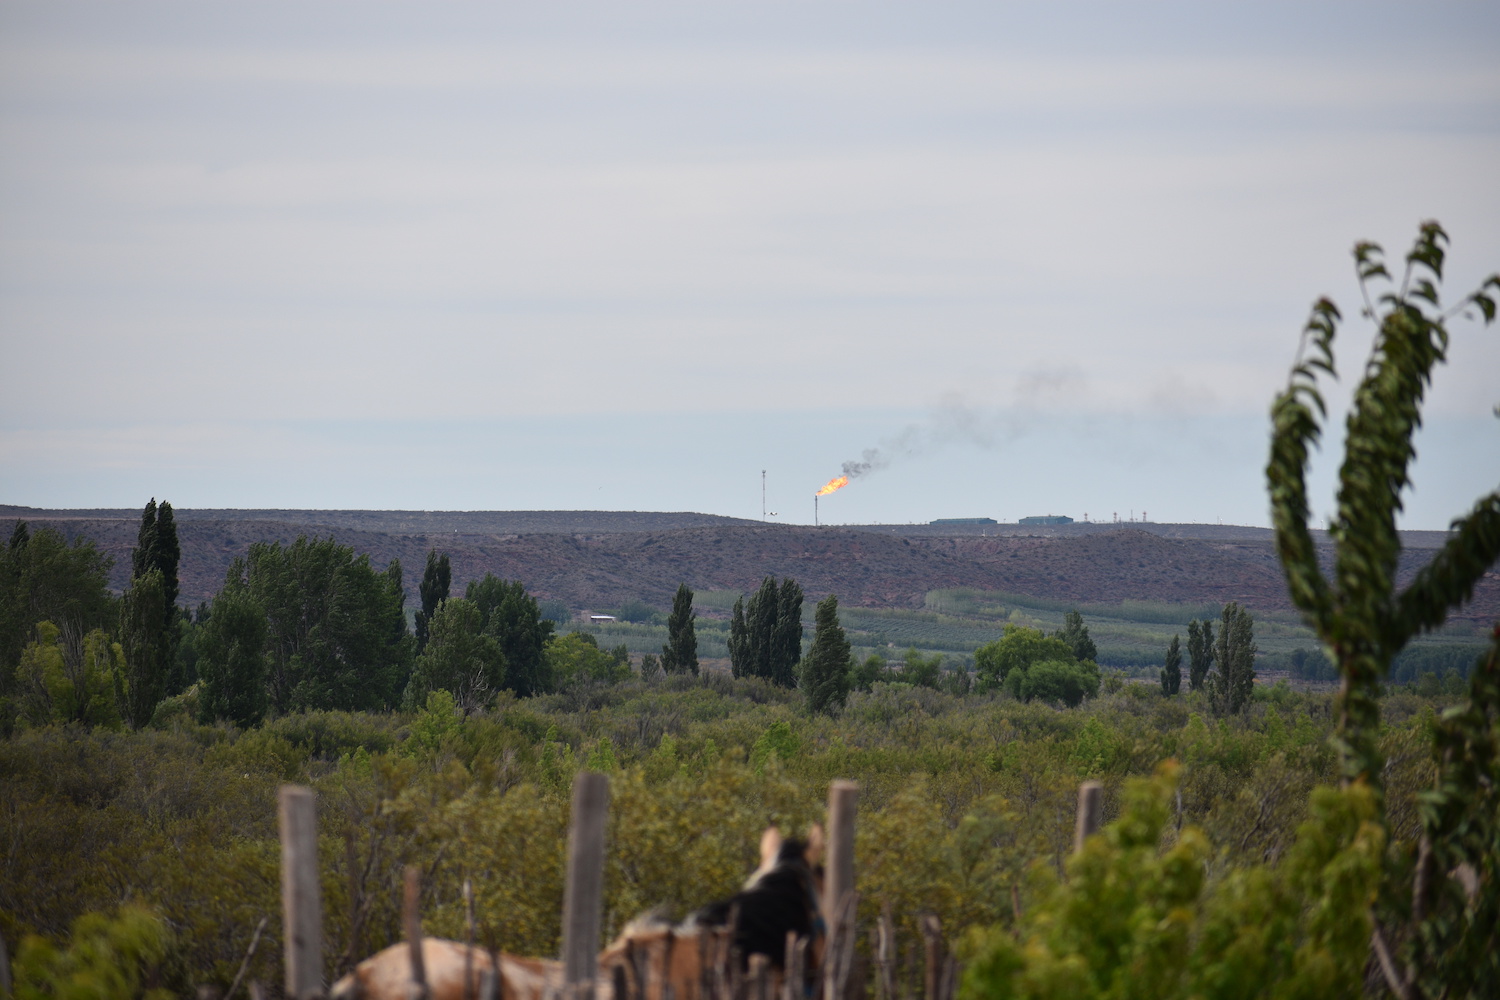 Flare visible from Mapuche land